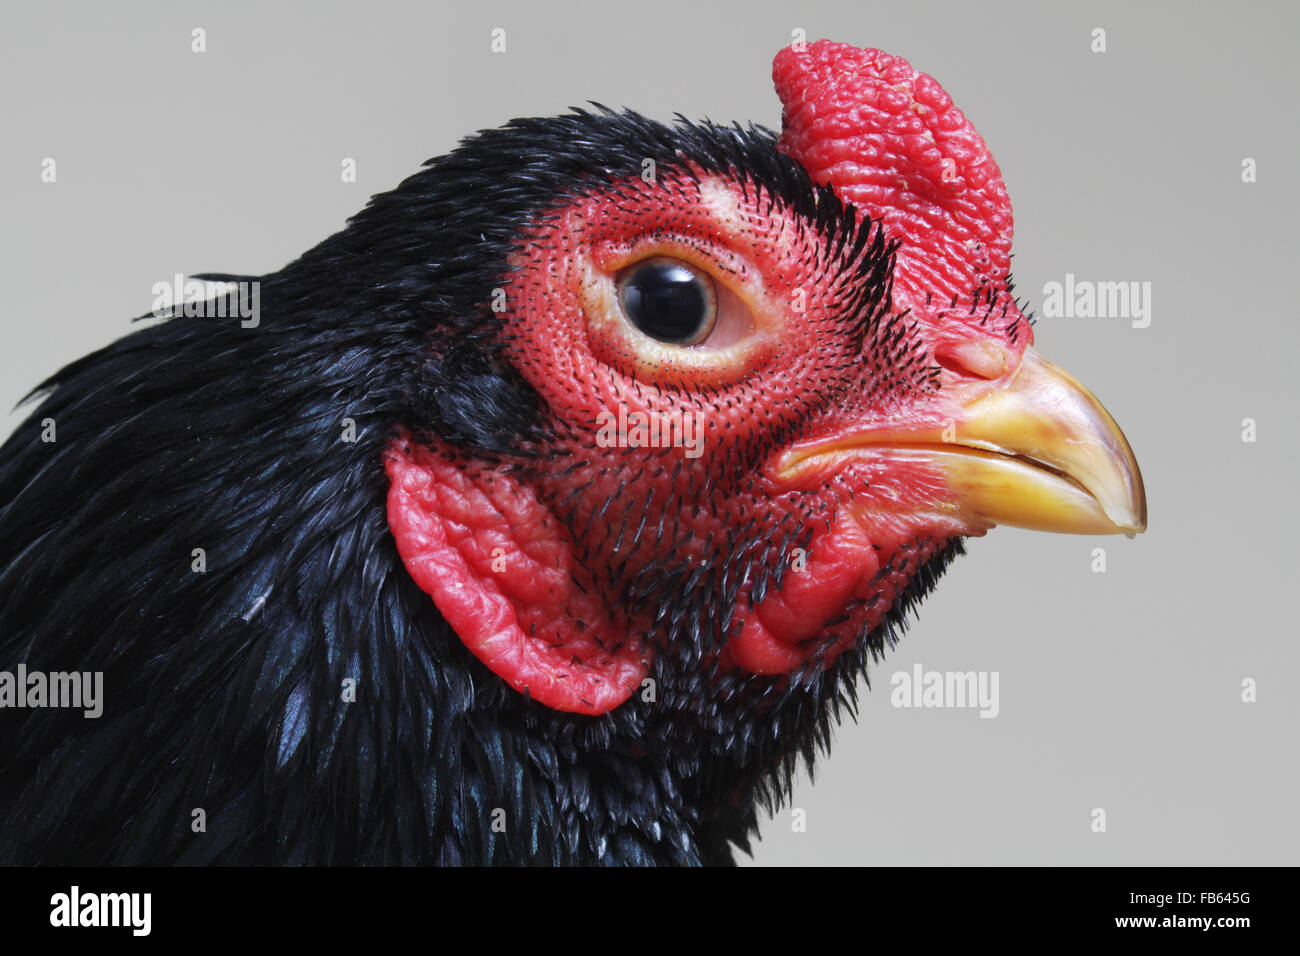 Close-up portrait of a dark cornish bantam rooster at the 2014 Northeastern Poultry Congress Stock Photo